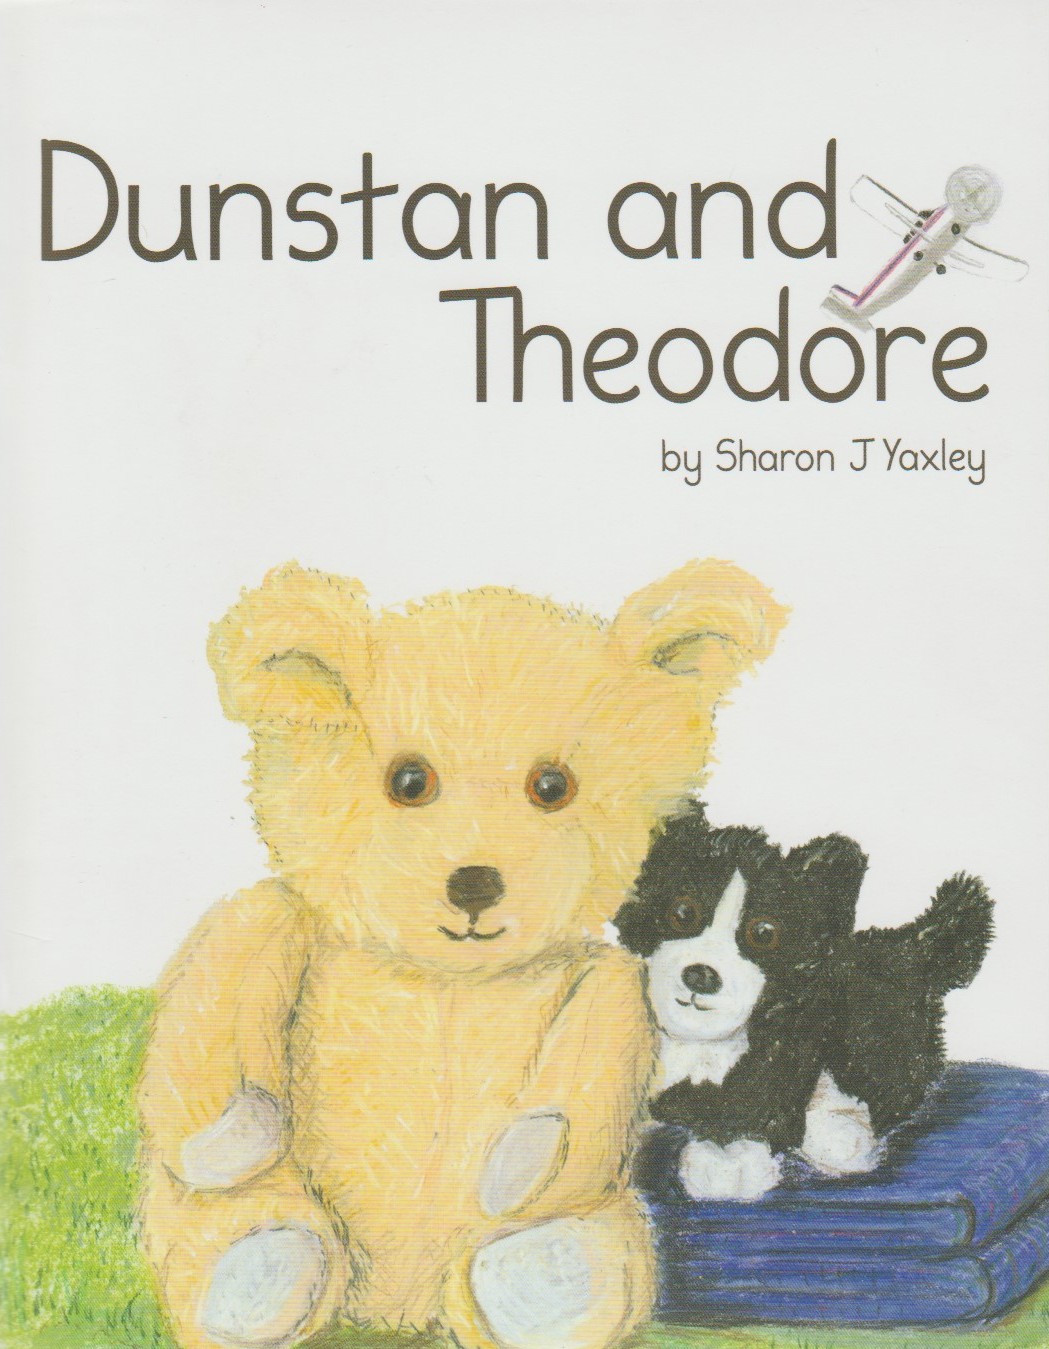 Dunstan and Theodore - an illustrated children's story